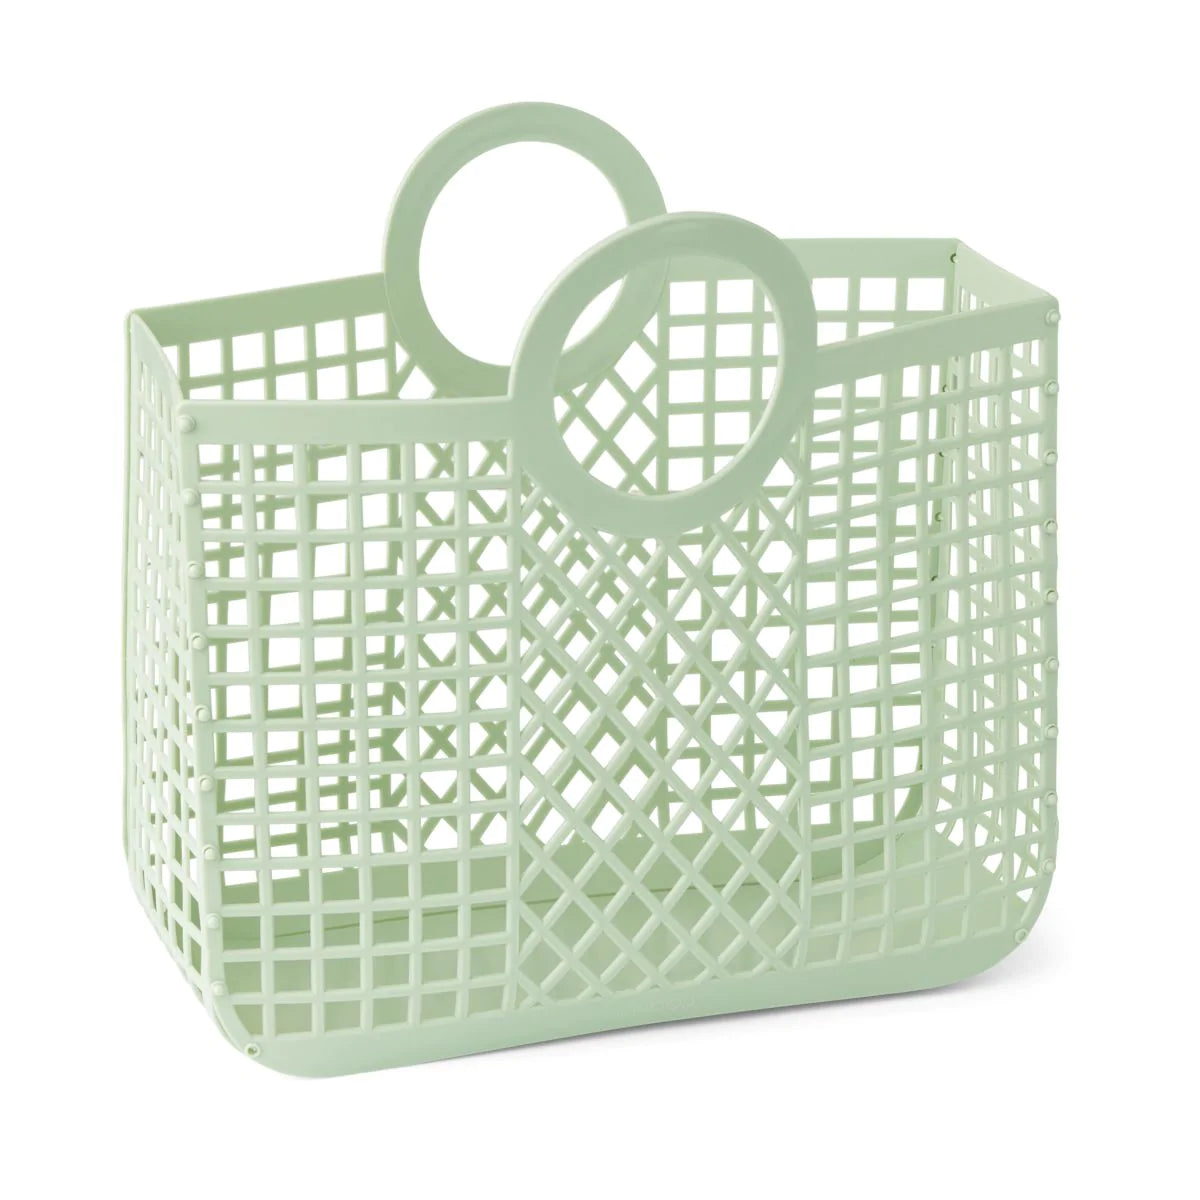 Liewood Samantha Basket in the Dusty Mint colour is available from Alf & Co, the children’s independent 